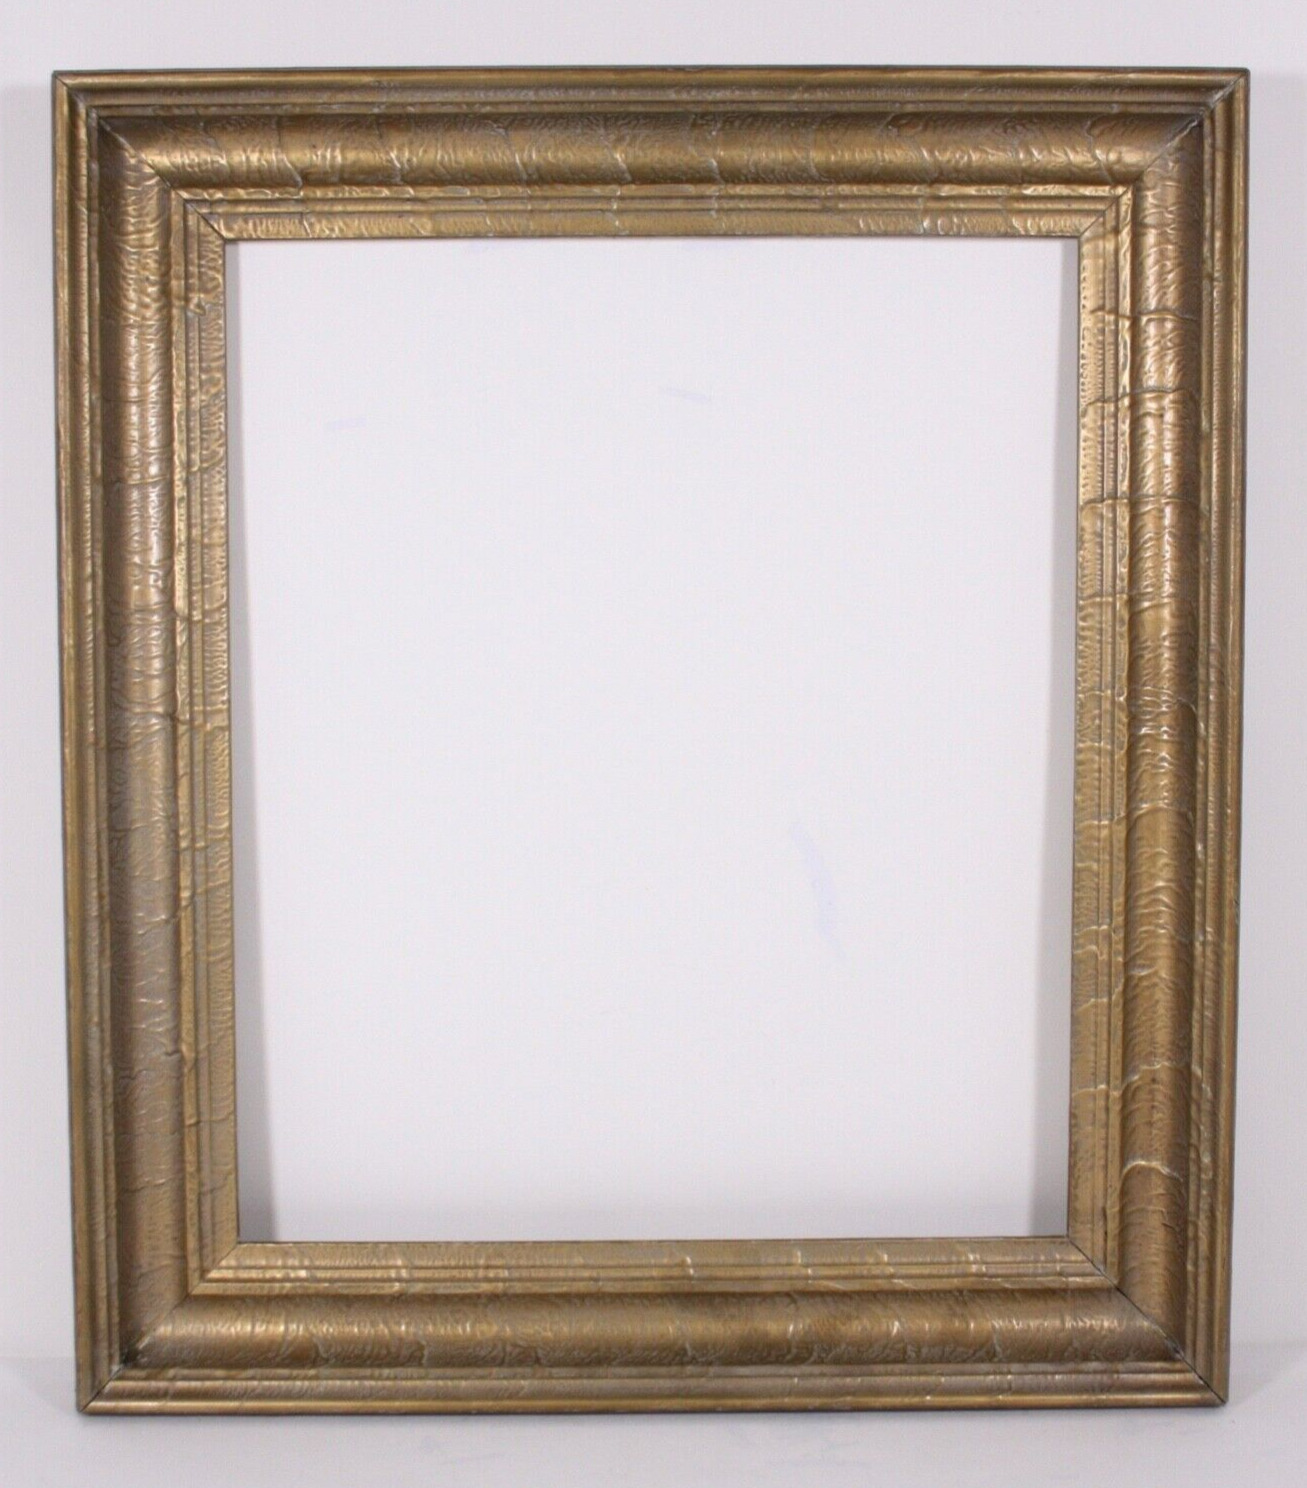 Wide 3.5 Border Gold Gilt 25.5x22.5 Antique Wood Frame for 20x17 Painting Print